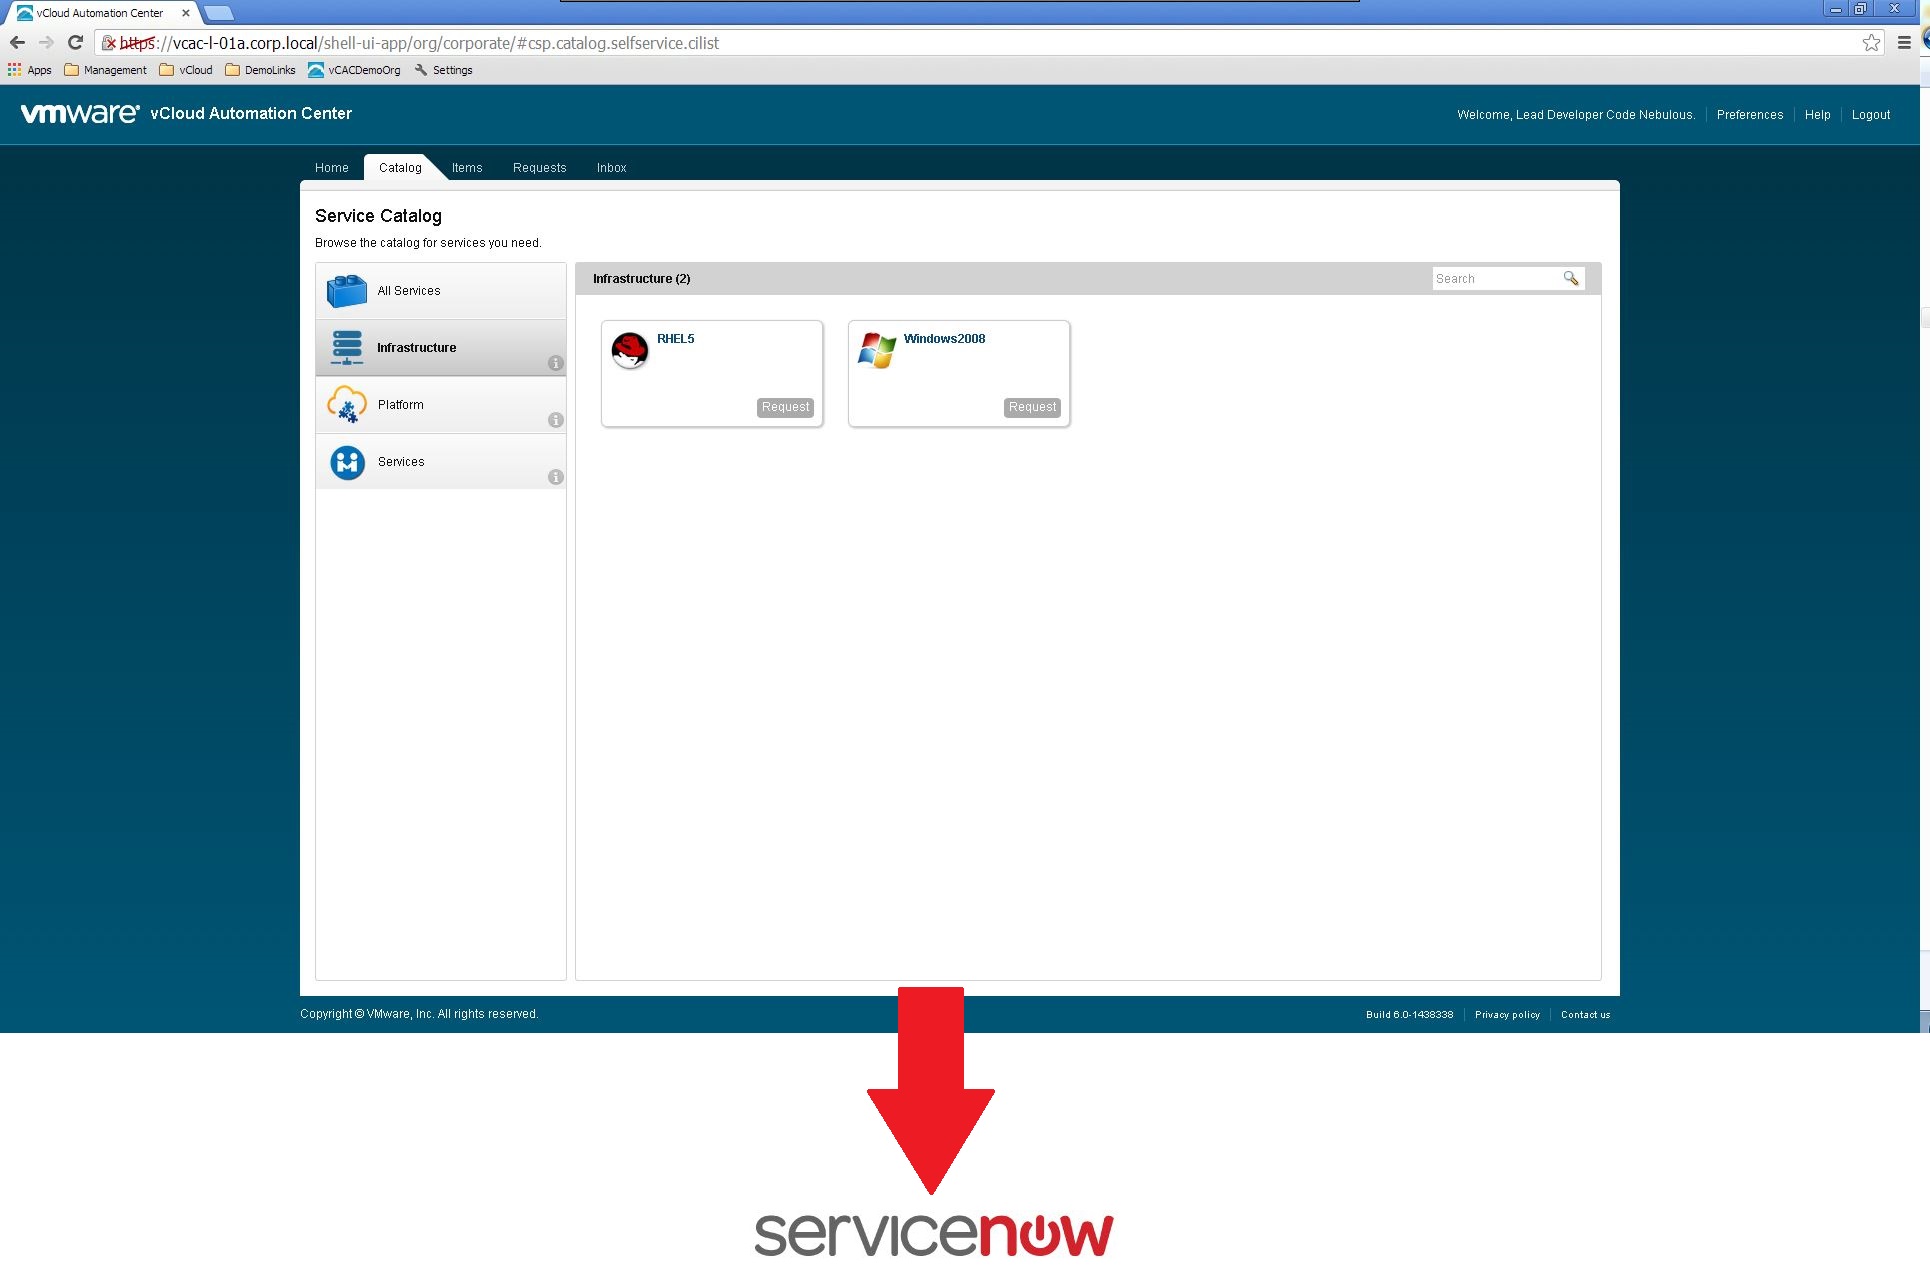 vCAC6toServiceNow